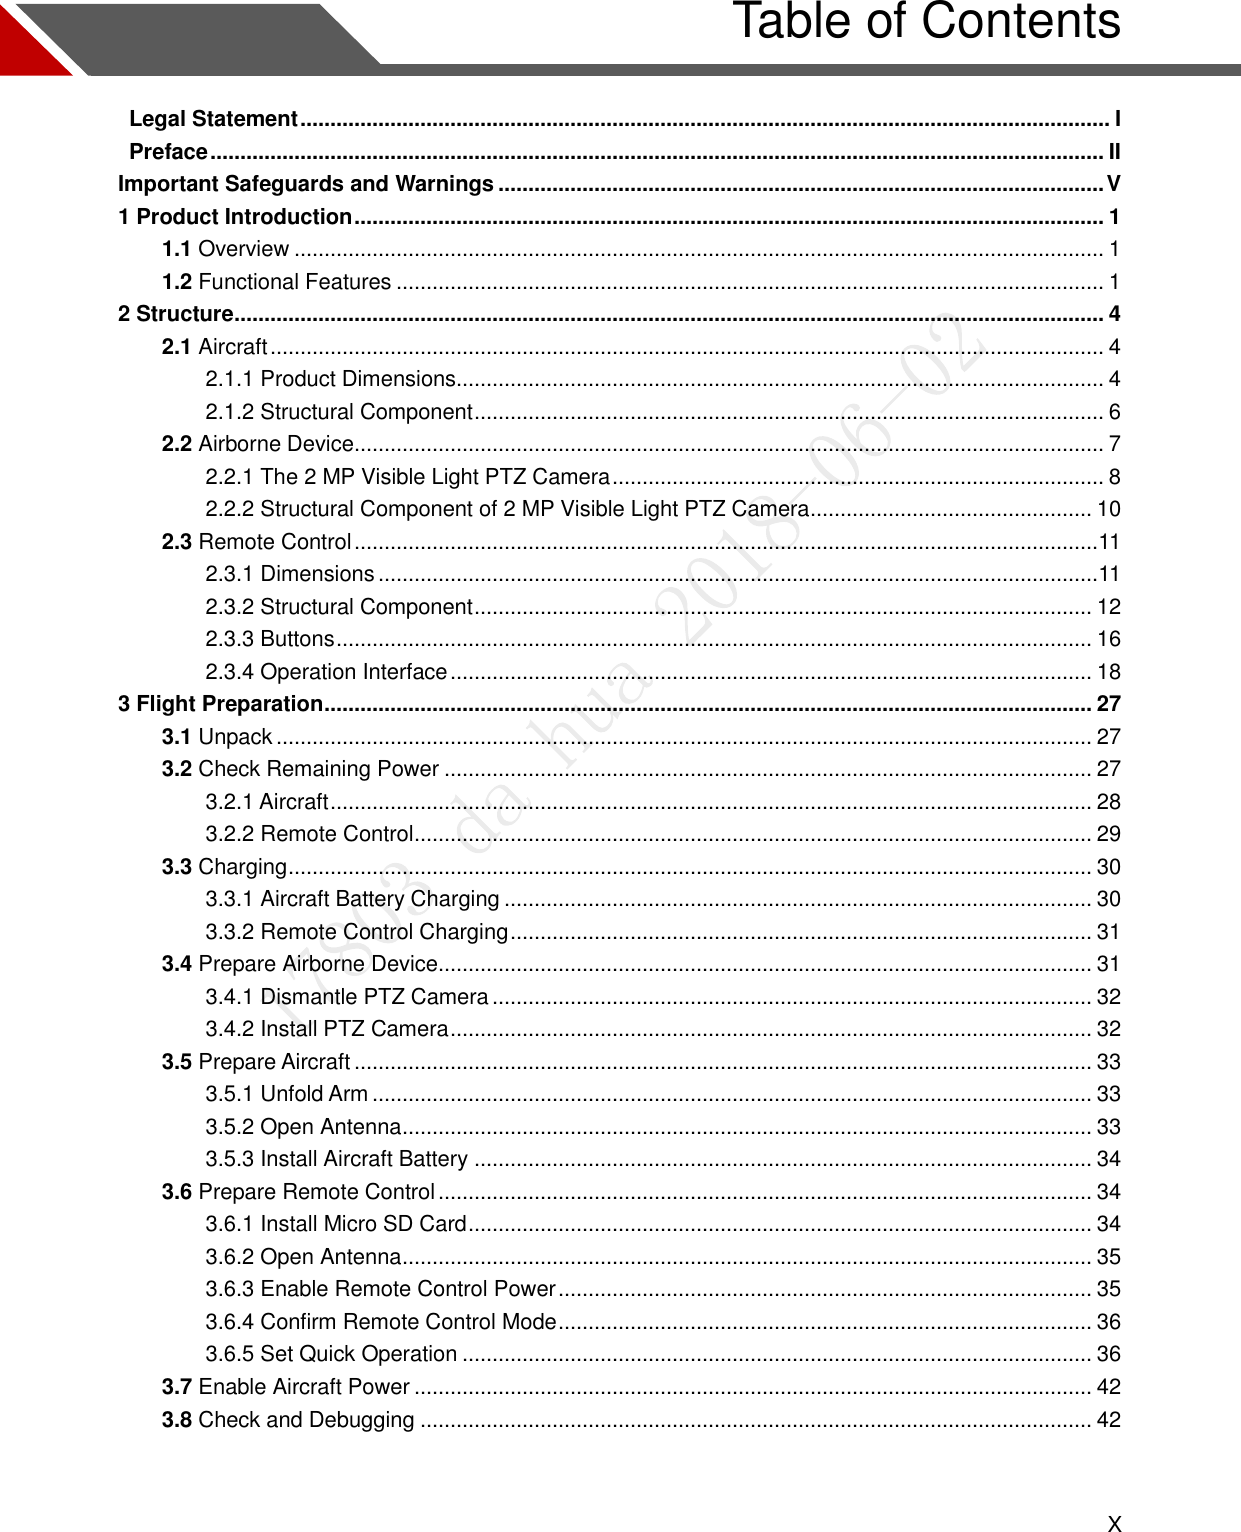  X   Table of Contents   Legal Statement ....................................................................................................................................... I   Preface ..................................................................................................................................................... II Important Safeguards and Warnings ..................................................................................................... V 1 Product Introduction ............................................................................................................................. 1 1.1 Overview ....................................................................................................................................... 1 1.2 Functional Features ...................................................................................................................... 1 2 Structure ................................................................................................................................................. 4 2.1 Aircraft ........................................................................................................................................... 4 2.1.1 Product Dimensions............................................................................................................ 4 2.1.2 Structural Component ......................................................................................................... 6 2.2 Airborne Device............................................................................................................................. 7 2.2.1 The 2 MP Visible Light PTZ Camera .................................................................................. 8 2.2.2 Structural Component of 2 MP Visible Light PTZ Camera ............................................... 10 2.3 Remote Control ............................................................................................................................ 11 2.3.1 Dimensions ........................................................................................................................ 11 2.3.2 Structural Component ....................................................................................................... 12 2.3.3 Buttons .............................................................................................................................. 16 2.3.4 Operation Interface ........................................................................................................... 18 3 Flight Preparation ................................................................................................................................ 27 3.1 Unpack ........................................................................................................................................ 27 3.2 Check Remaining Power ............................................................................................................ 27 3.2.1 Aircraft ............................................................................................................................... 28 3.2.2 Remote Control ................................................................................................................. 29 3.3 Charging ...................................................................................................................................... 30 3.3.1 Aircraft Battery Charging .................................................................................................. 30 3.3.2 Remote Control Charging ................................................................................................. 31 3.4 Prepare Airborne Device ............................................................................................................. 31 3.4.1 Dismantle PTZ Camera .................................................................................................... 32 3.4.2 Install PTZ Camera ........................................................................................................... 32 3.5 Prepare Aircraft ........................................................................................................................... 33 3.5.1 Unfold Arm ........................................................................................................................ 33 3.5.2 Open Antenna ................................................................................................................... 33 3.5.3 Install Aircraft Battery ....................................................................................................... 34 3.6 Prepare Remote Control ............................................................................................................. 34 3.6.1 Install Micro SD Card ........................................................................................................ 34 3.6.2 Open Antenna ................................................................................................................... 35 3.6.3 Enable Remote Control Power ......................................................................................... 35 3.6.4 Confirm Remote Control Mode ......................................................................................... 36 3.6.5 Set Quick Operation ......................................................................................................... 36 3.7 Enable Aircraft Power ................................................................................................................. 42 3.8 Check and Debugging ................................................................................................................ 42  